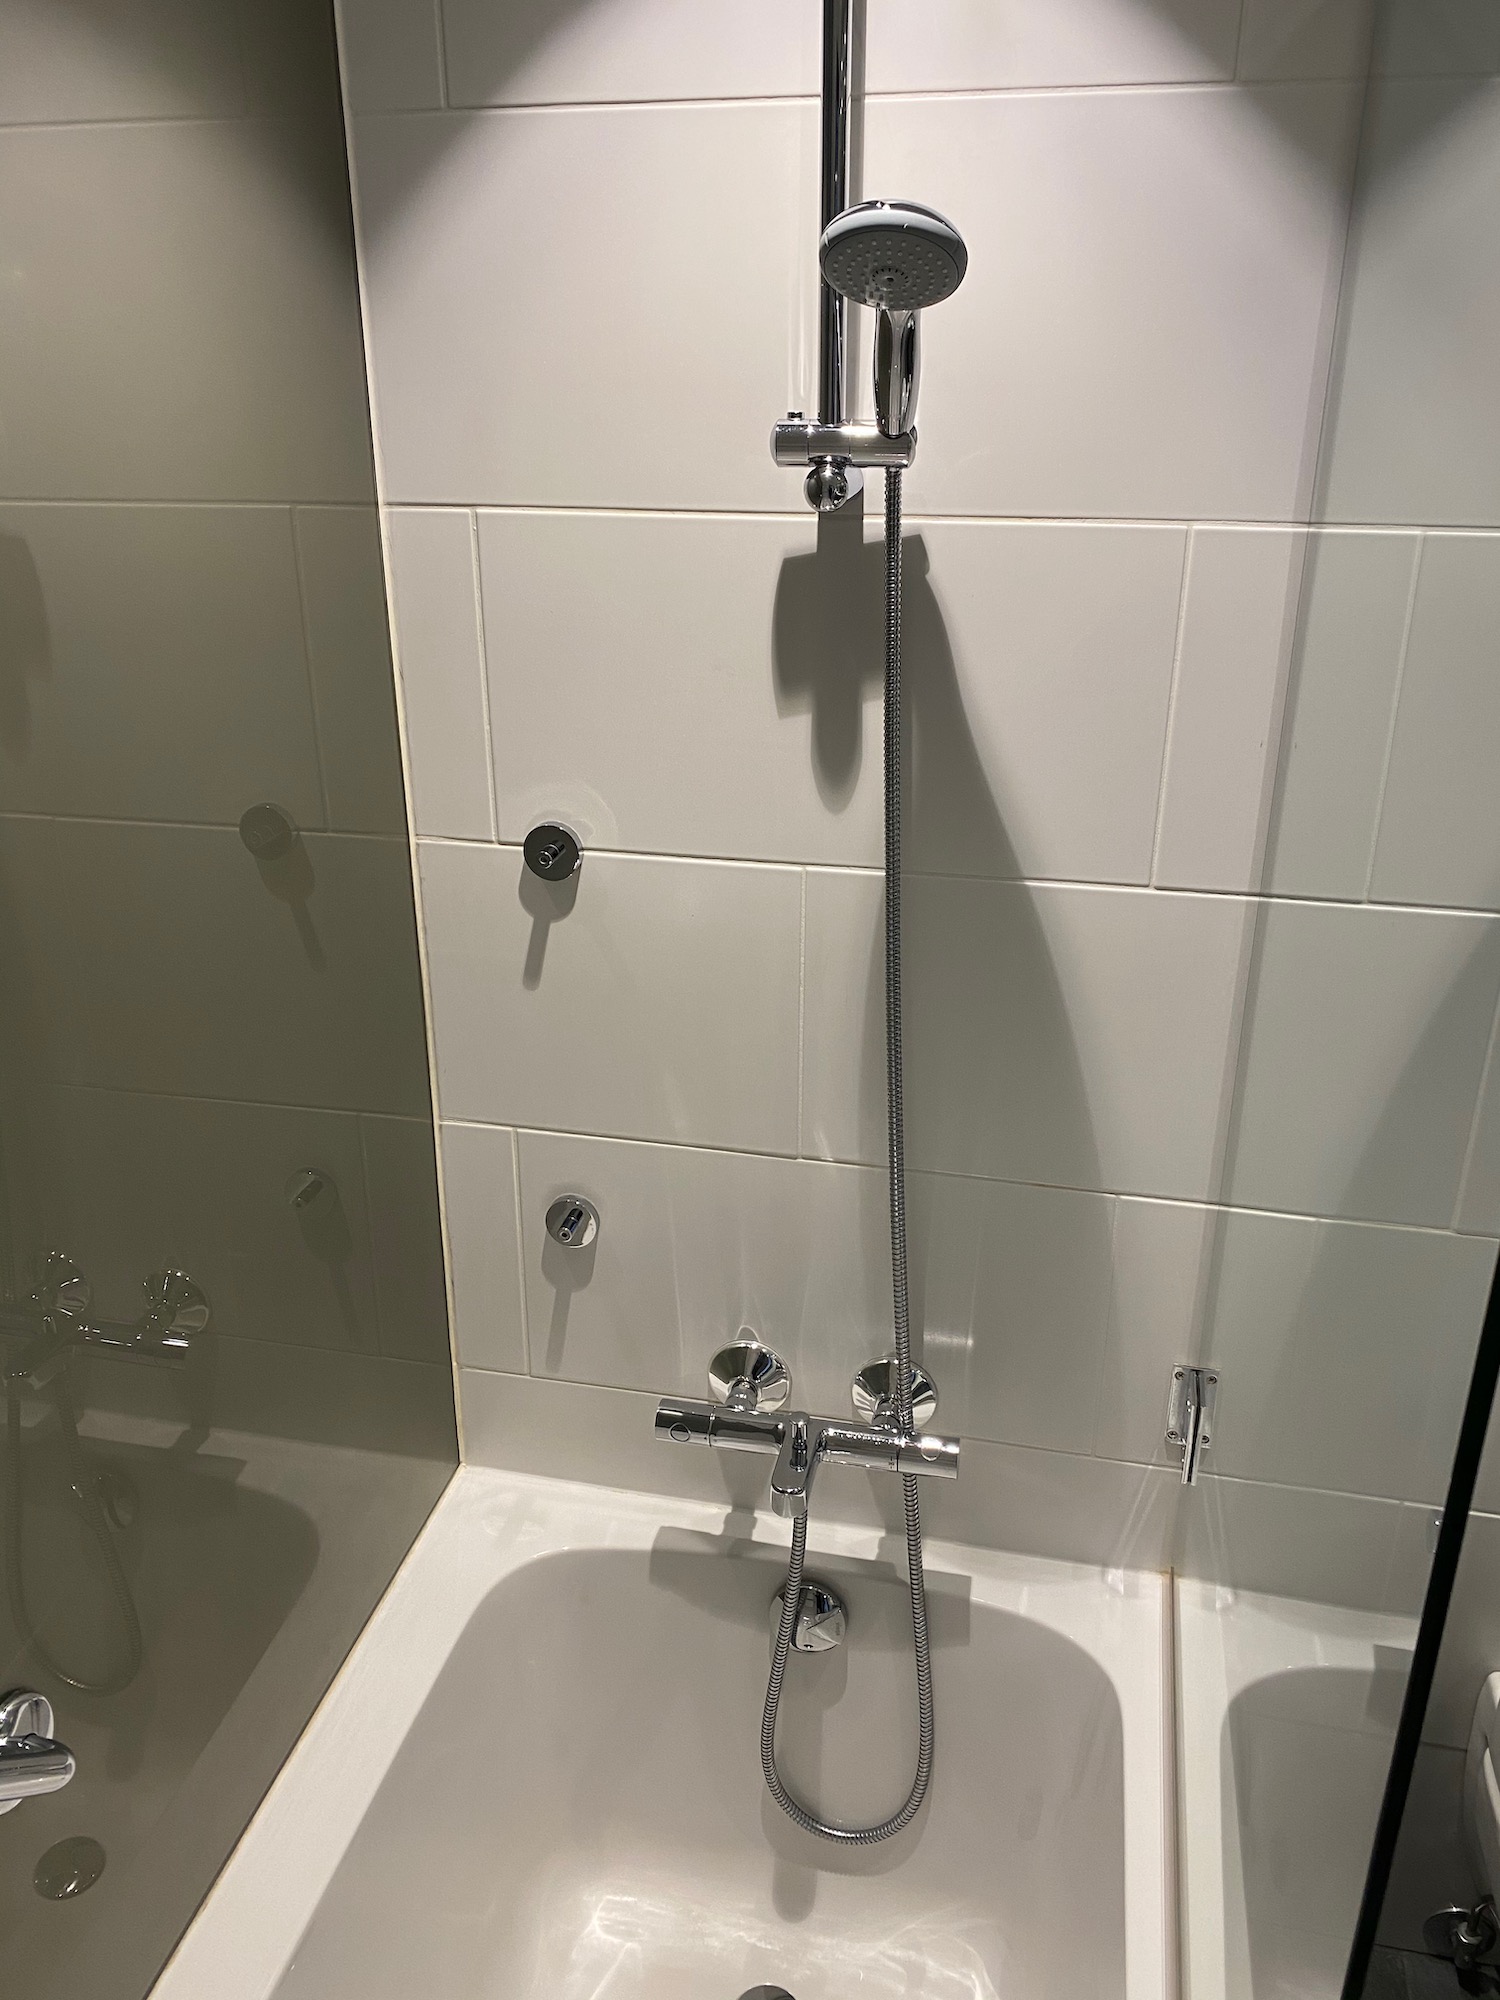 a shower head and tub in a bathroom